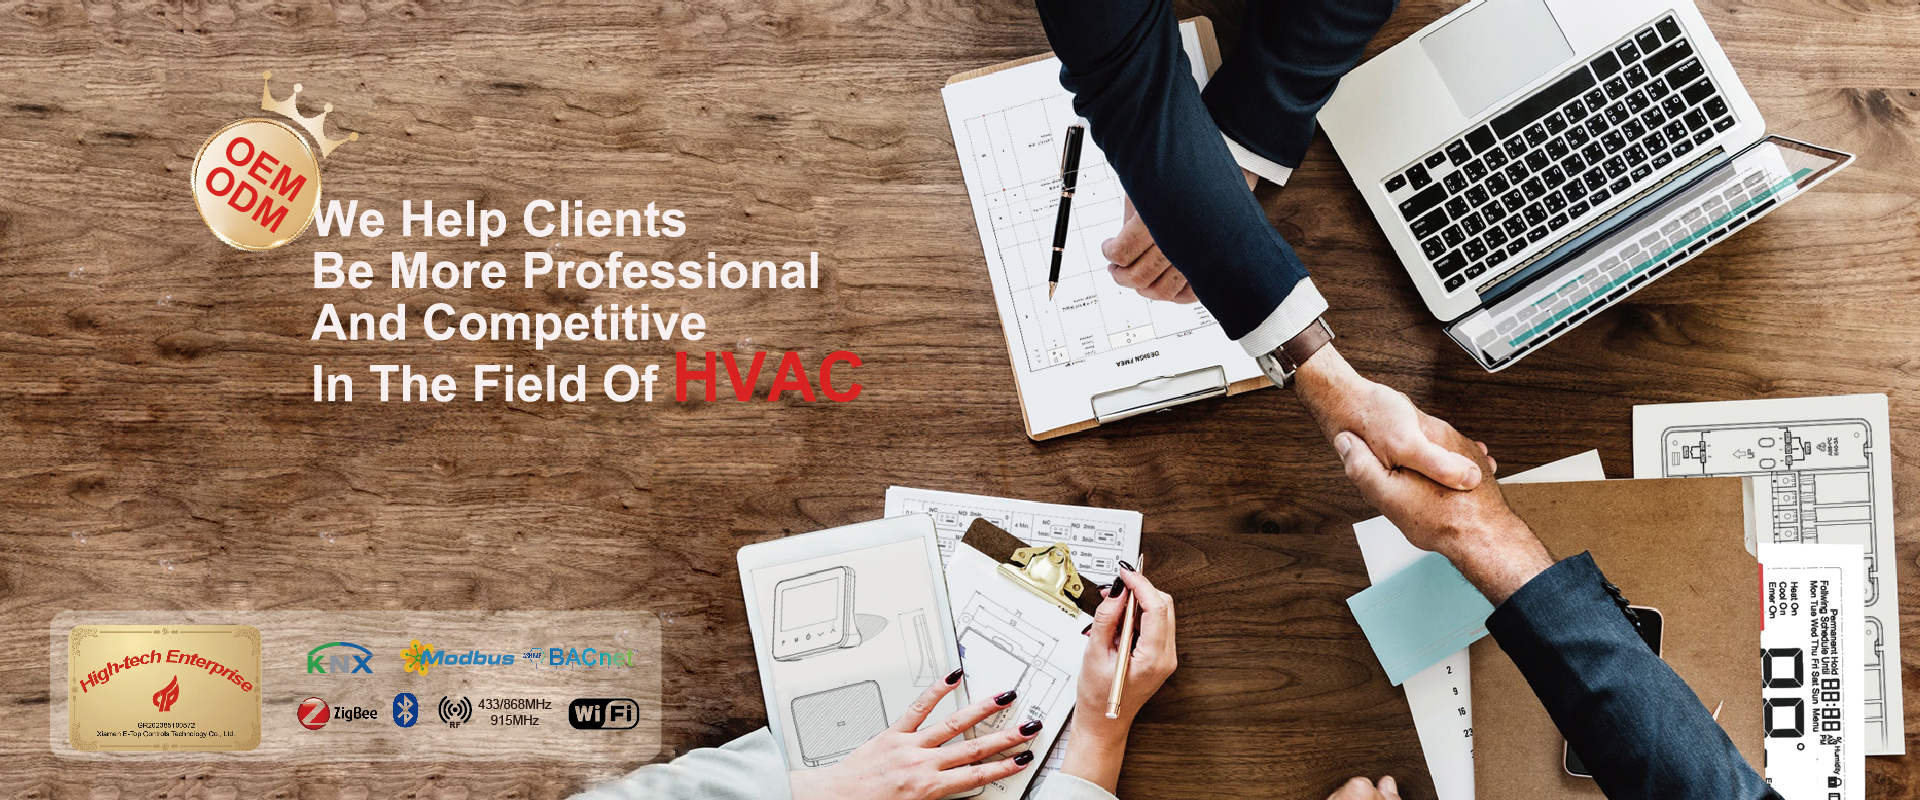 We help clients be more professional and competitive in the field of HVAC.